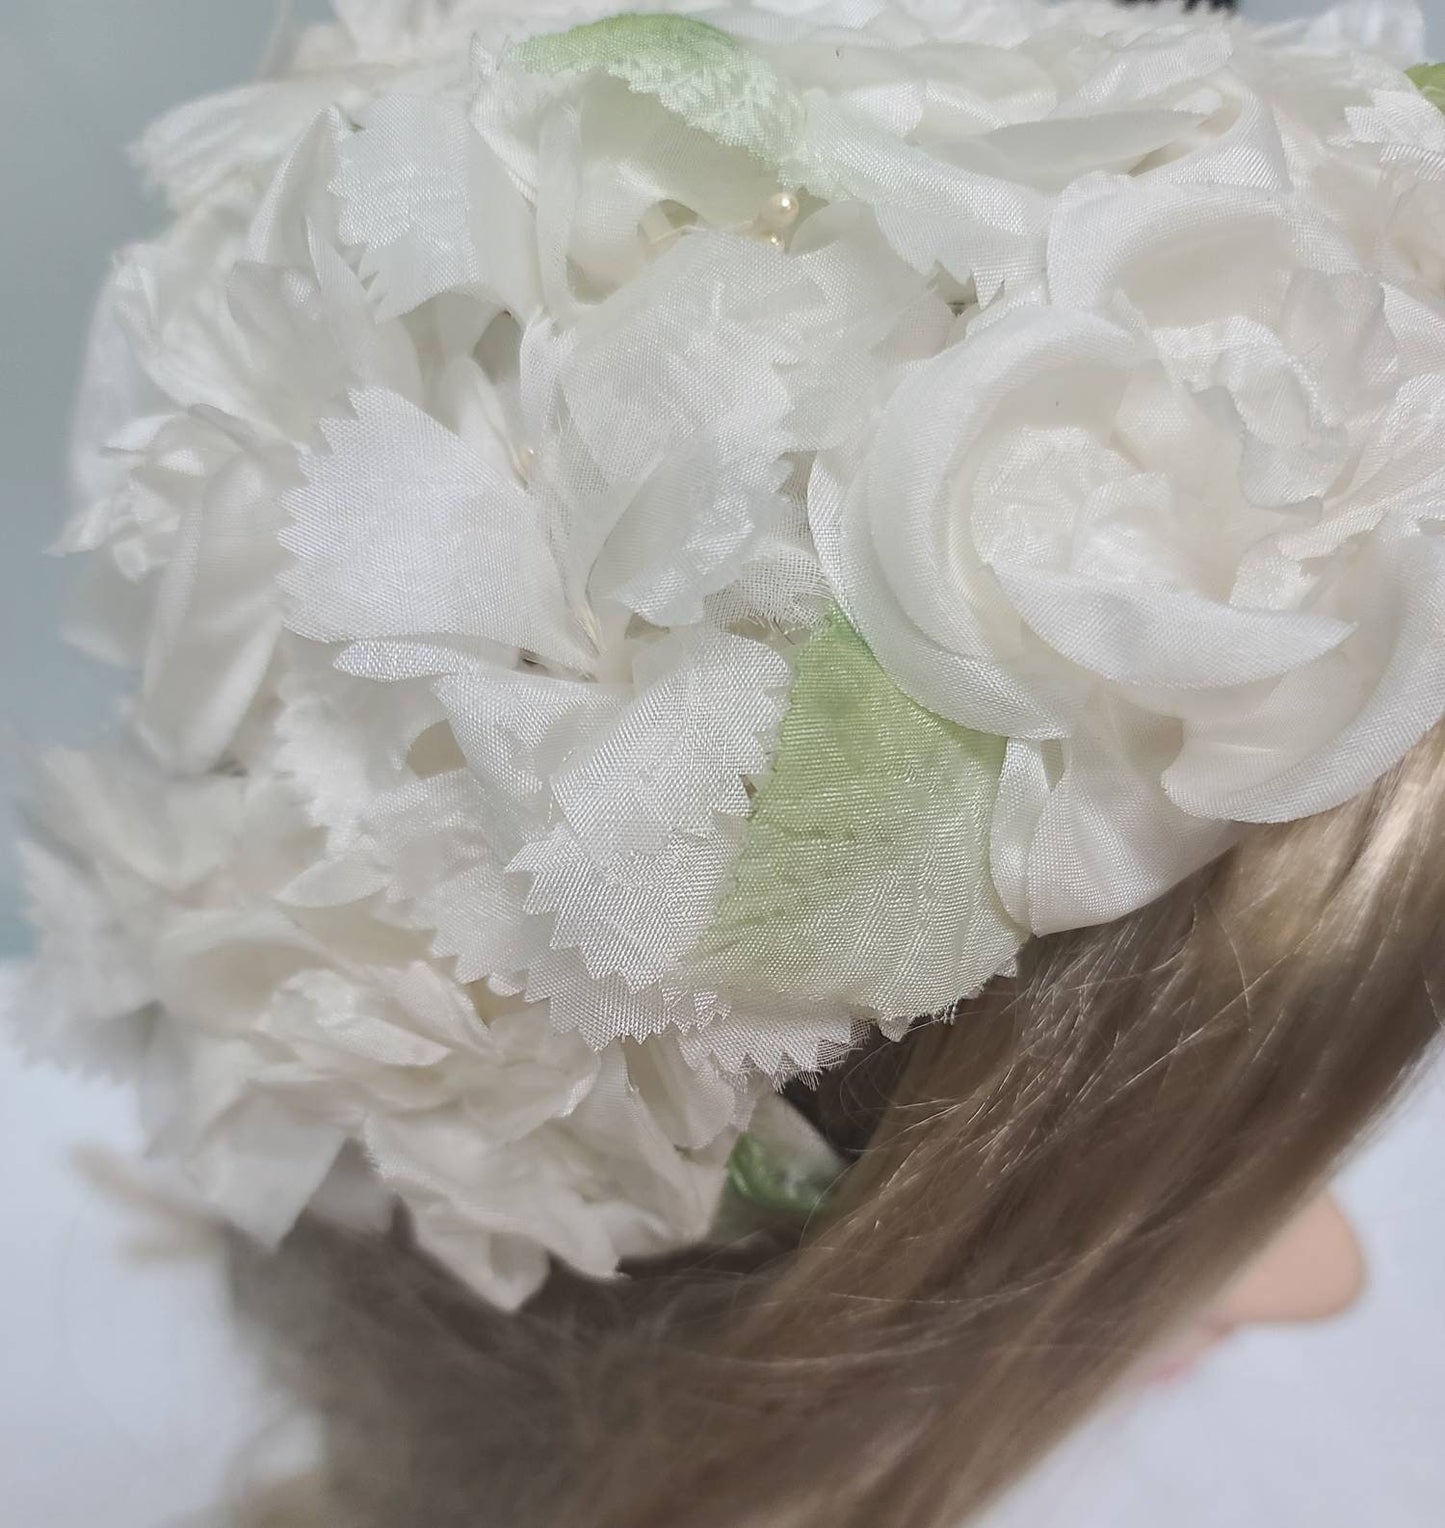 Vintage Half Hat 1950s White Floral Clamp Hat Lt Green Leaves Tiny Pearl Stamens Rockabilly Wedding Bridal Headpiece